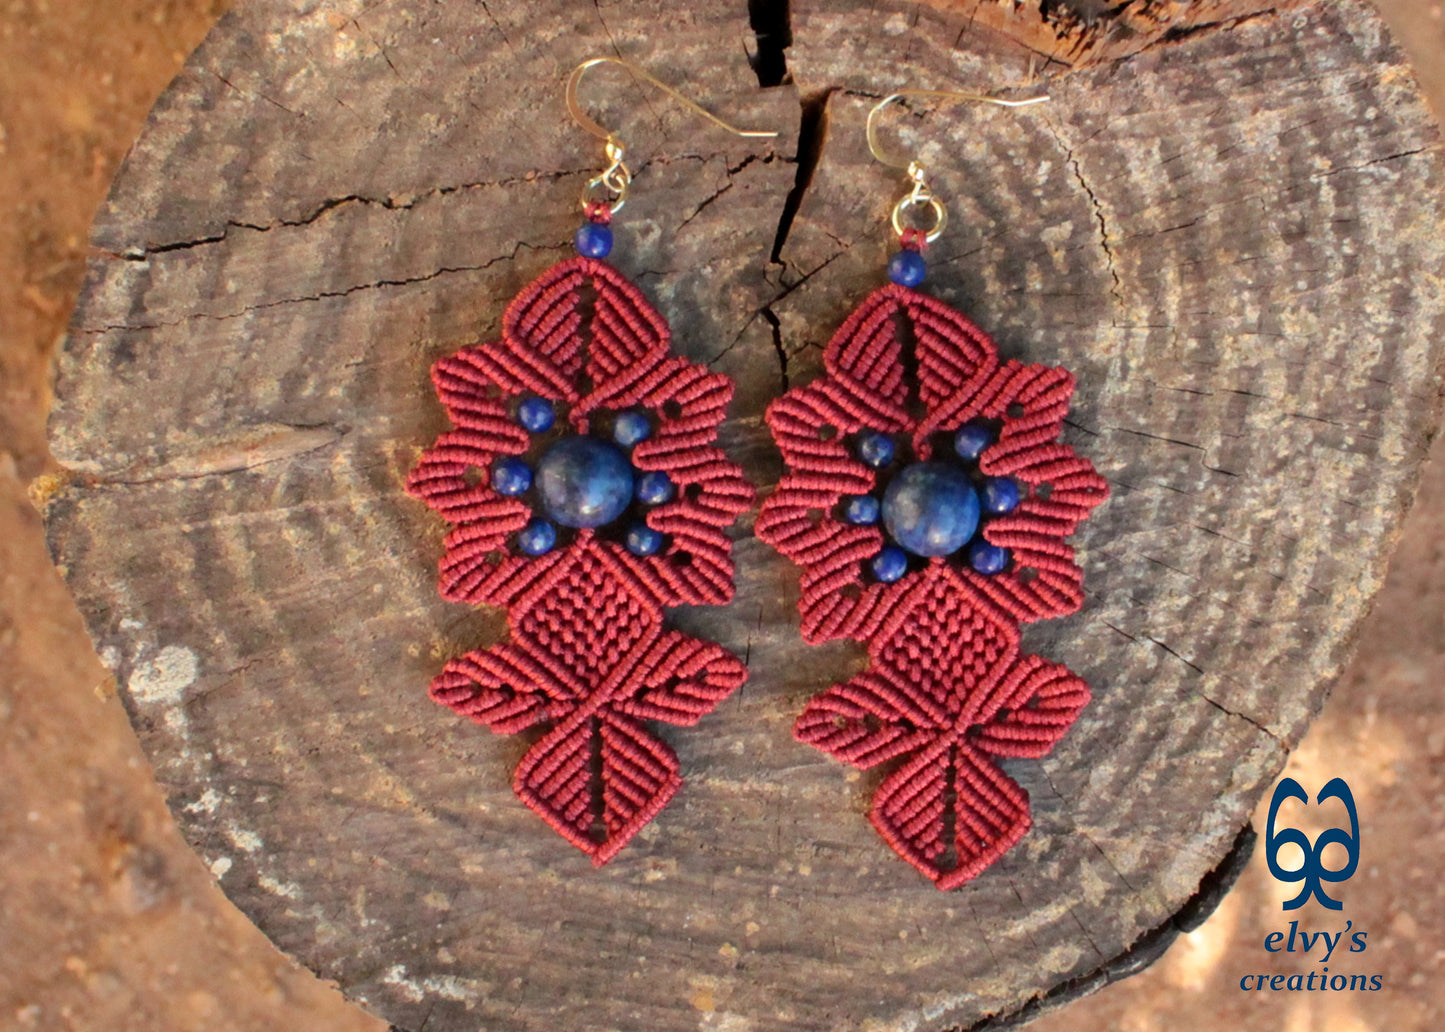 Red Macrame Earrings with Long Dangle with Blue Lapis Lazuli Gemstones